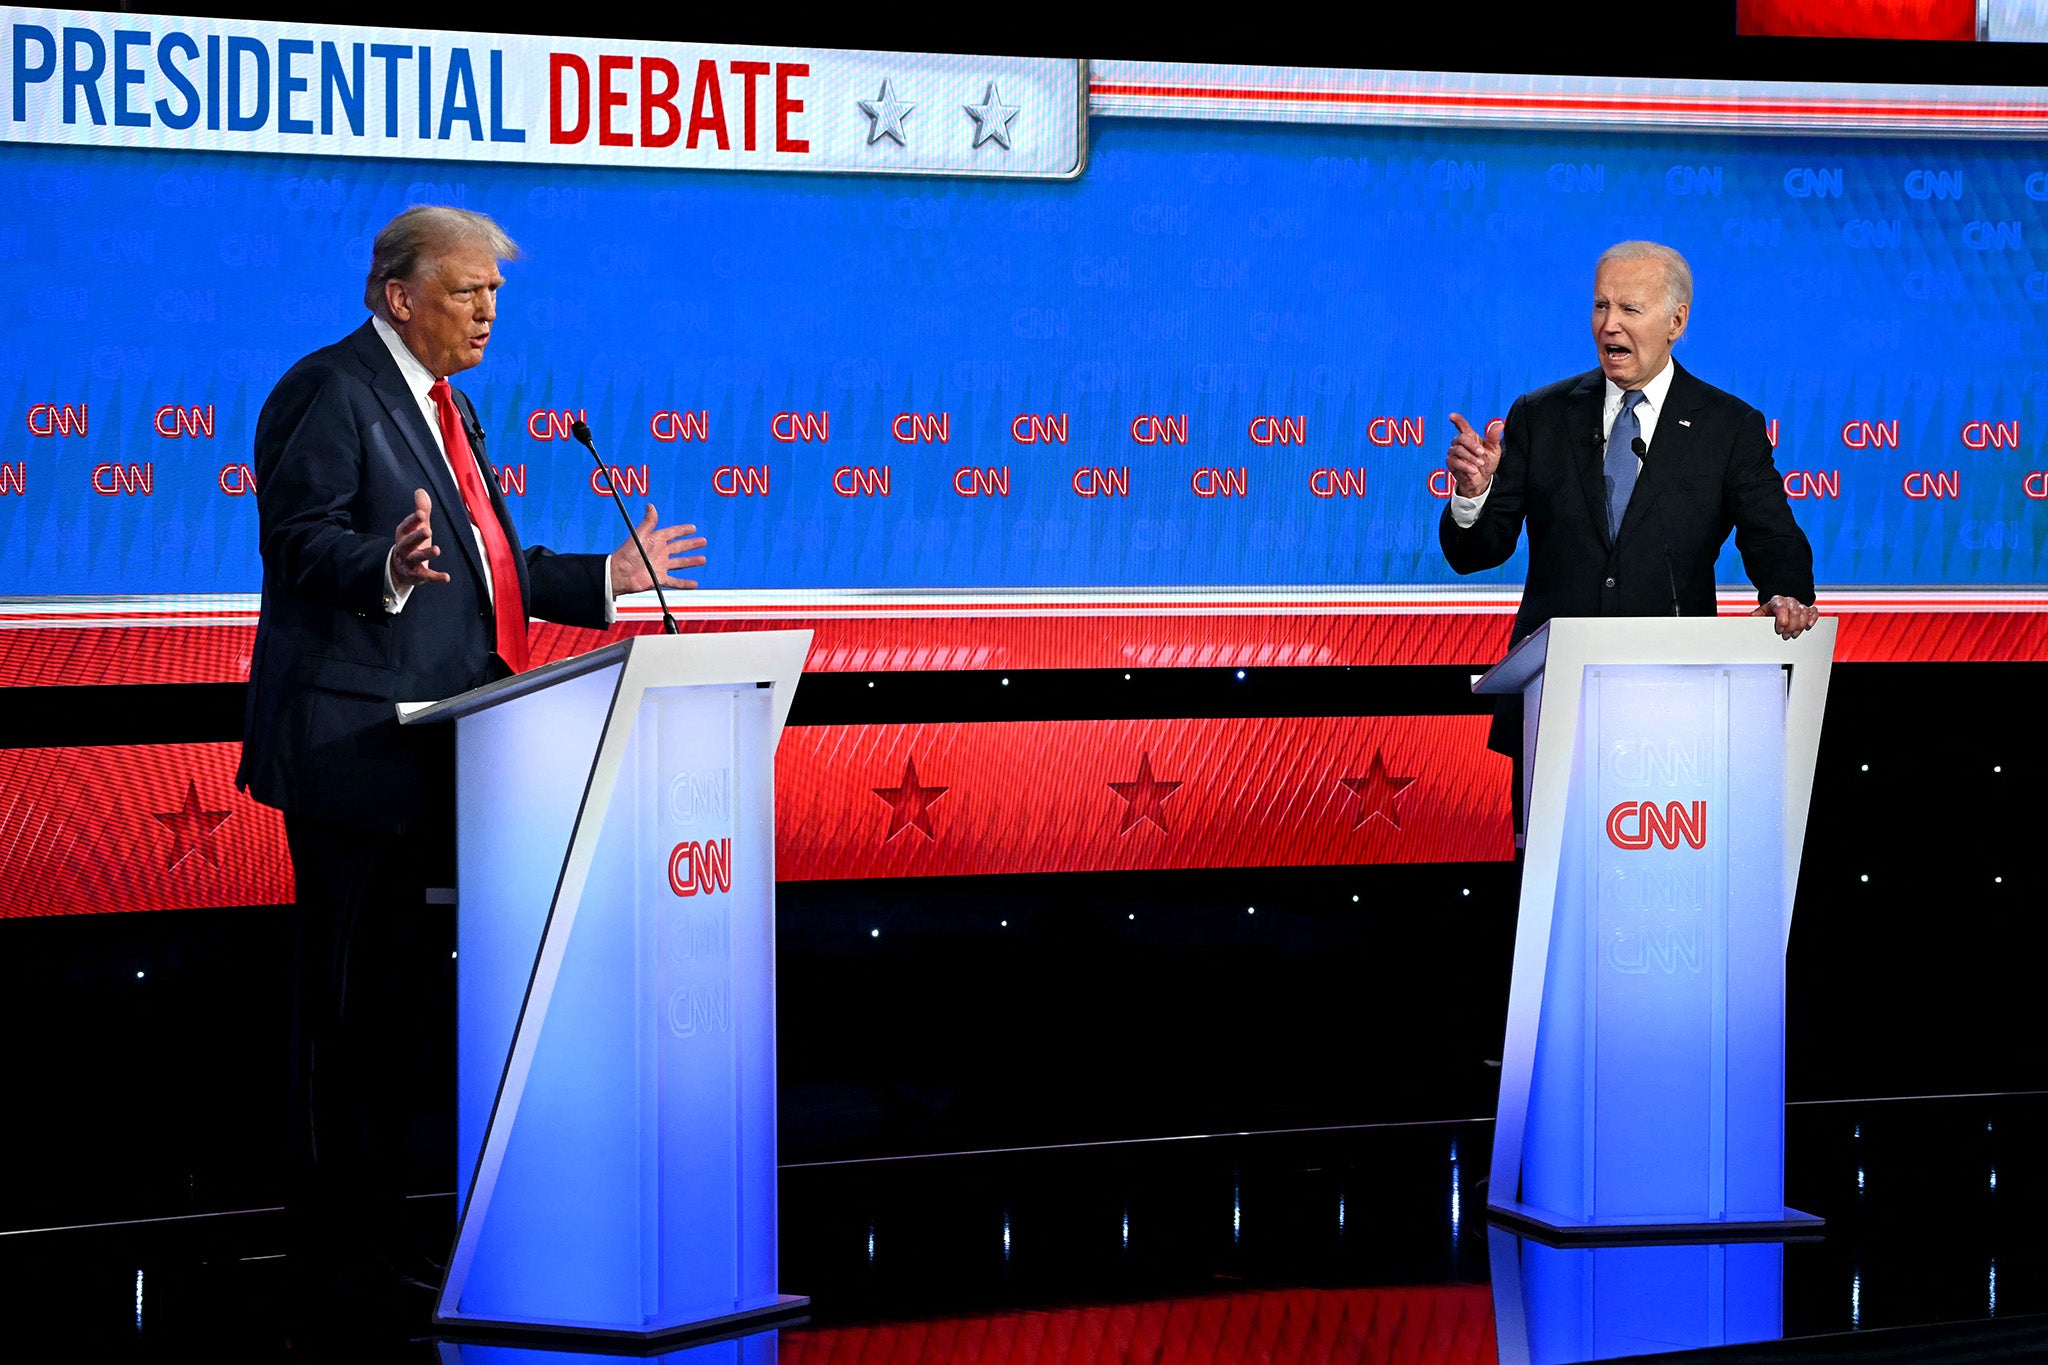 Donald Trump and Joe Biden engaged in their first televised debate on Thursday evening, live from Atlanta, Georgia